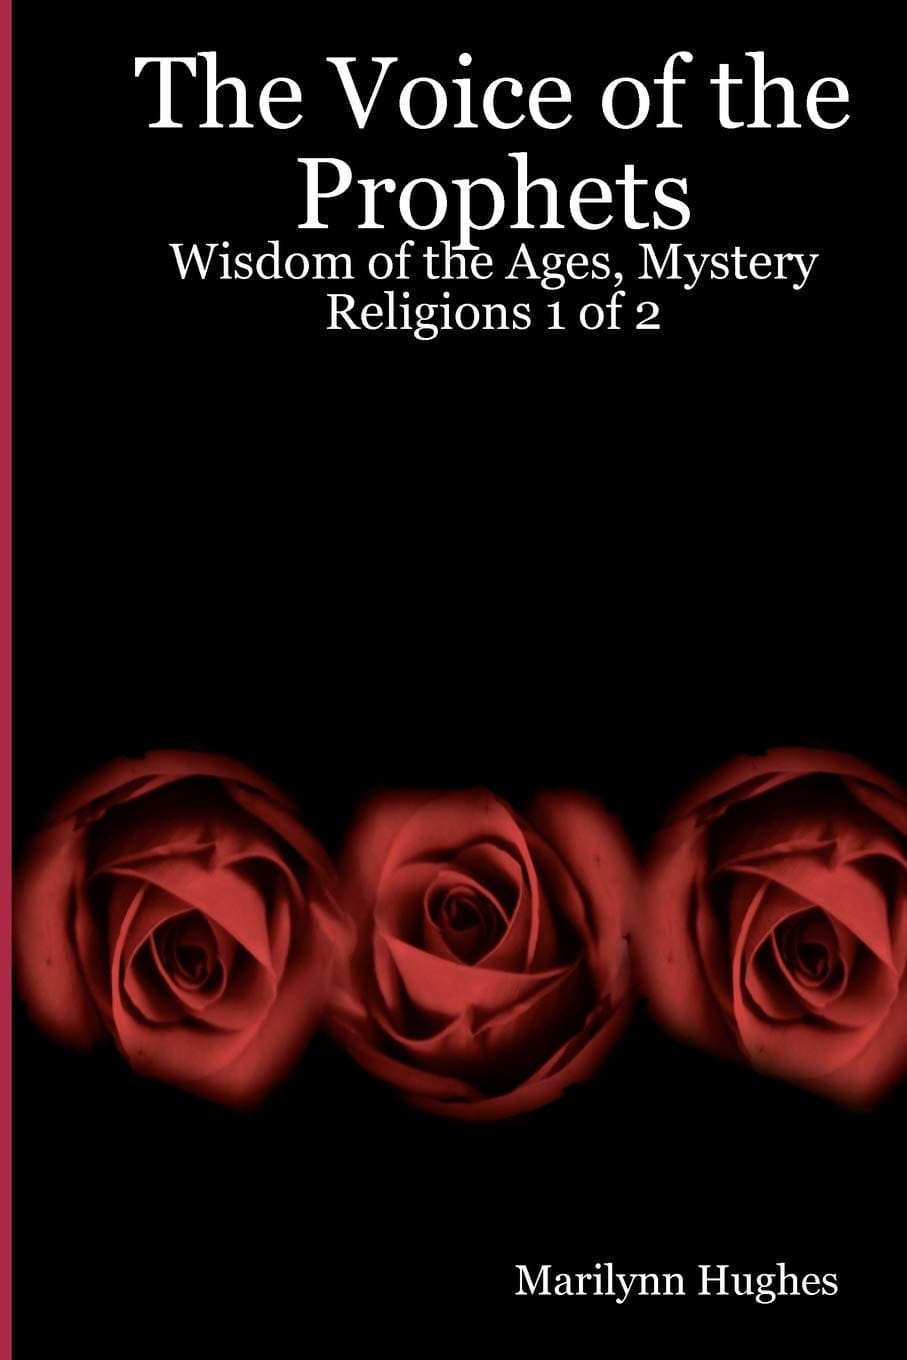 The Voice of the Prophets, Mystery Religions 1 of 2, By Marilynn Hughes - An Encyclopedia of Ancient Sacred Texts in Twelve Volumes - An Out-of-Body Travel Book